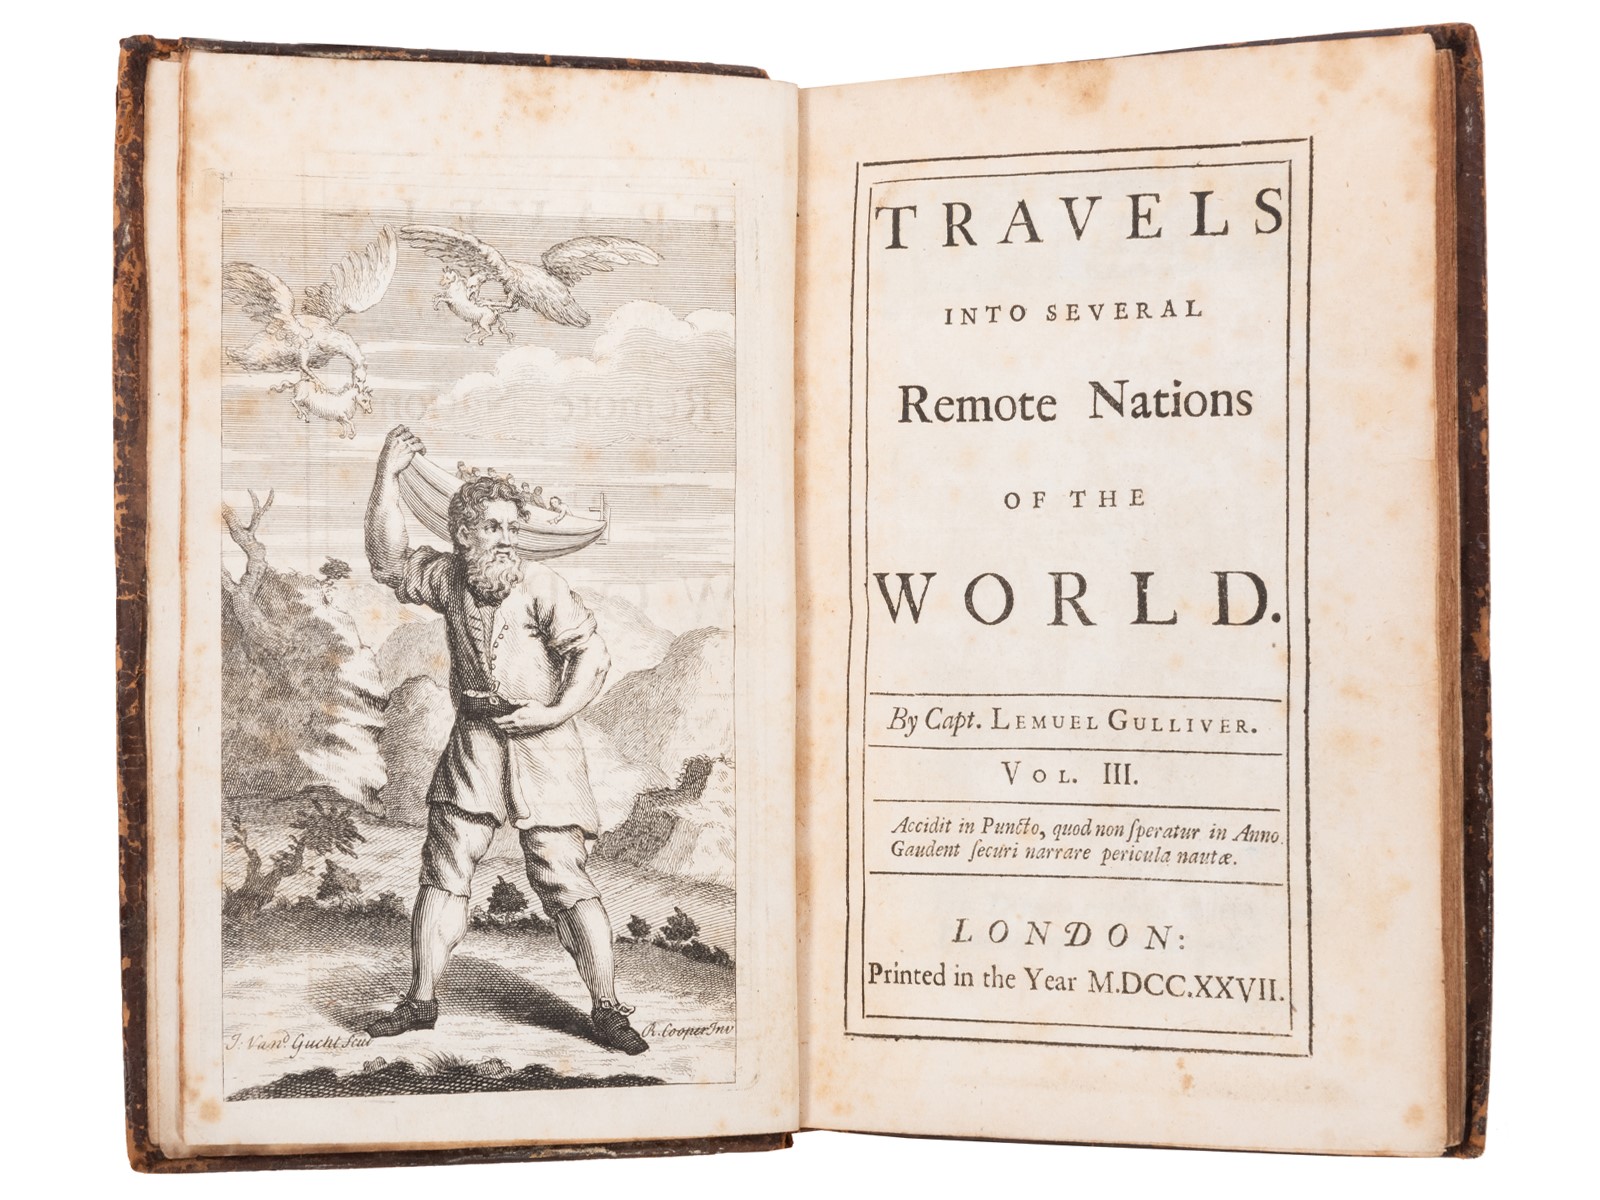 Jonathan Swift's Travels into Several Remote Nations of the World By Capt. Lemuel Gulliver. Vol. III